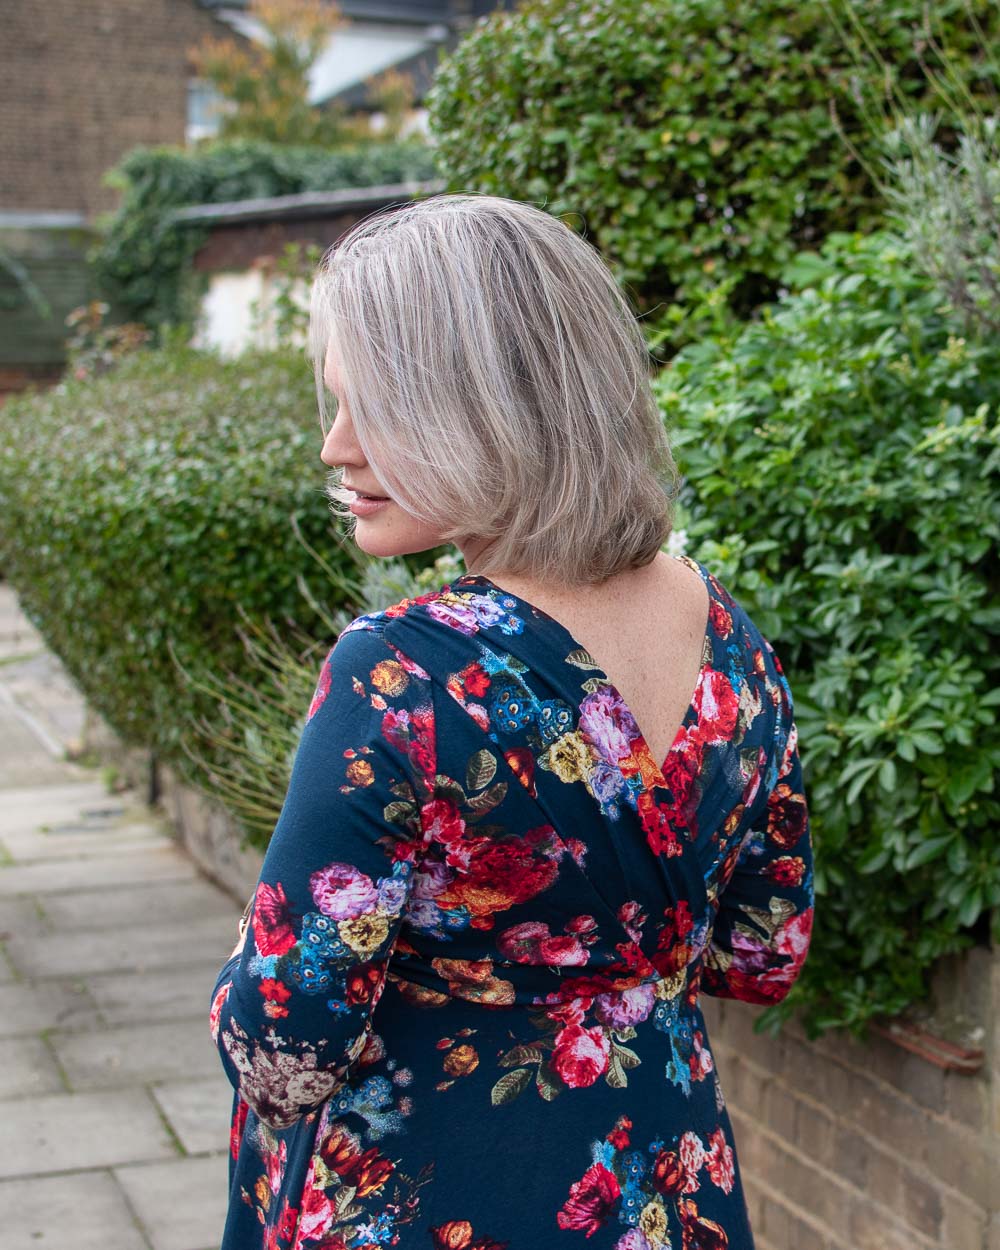 The deep v back of the floral dress from ethical maternity brand Tiffany Rose